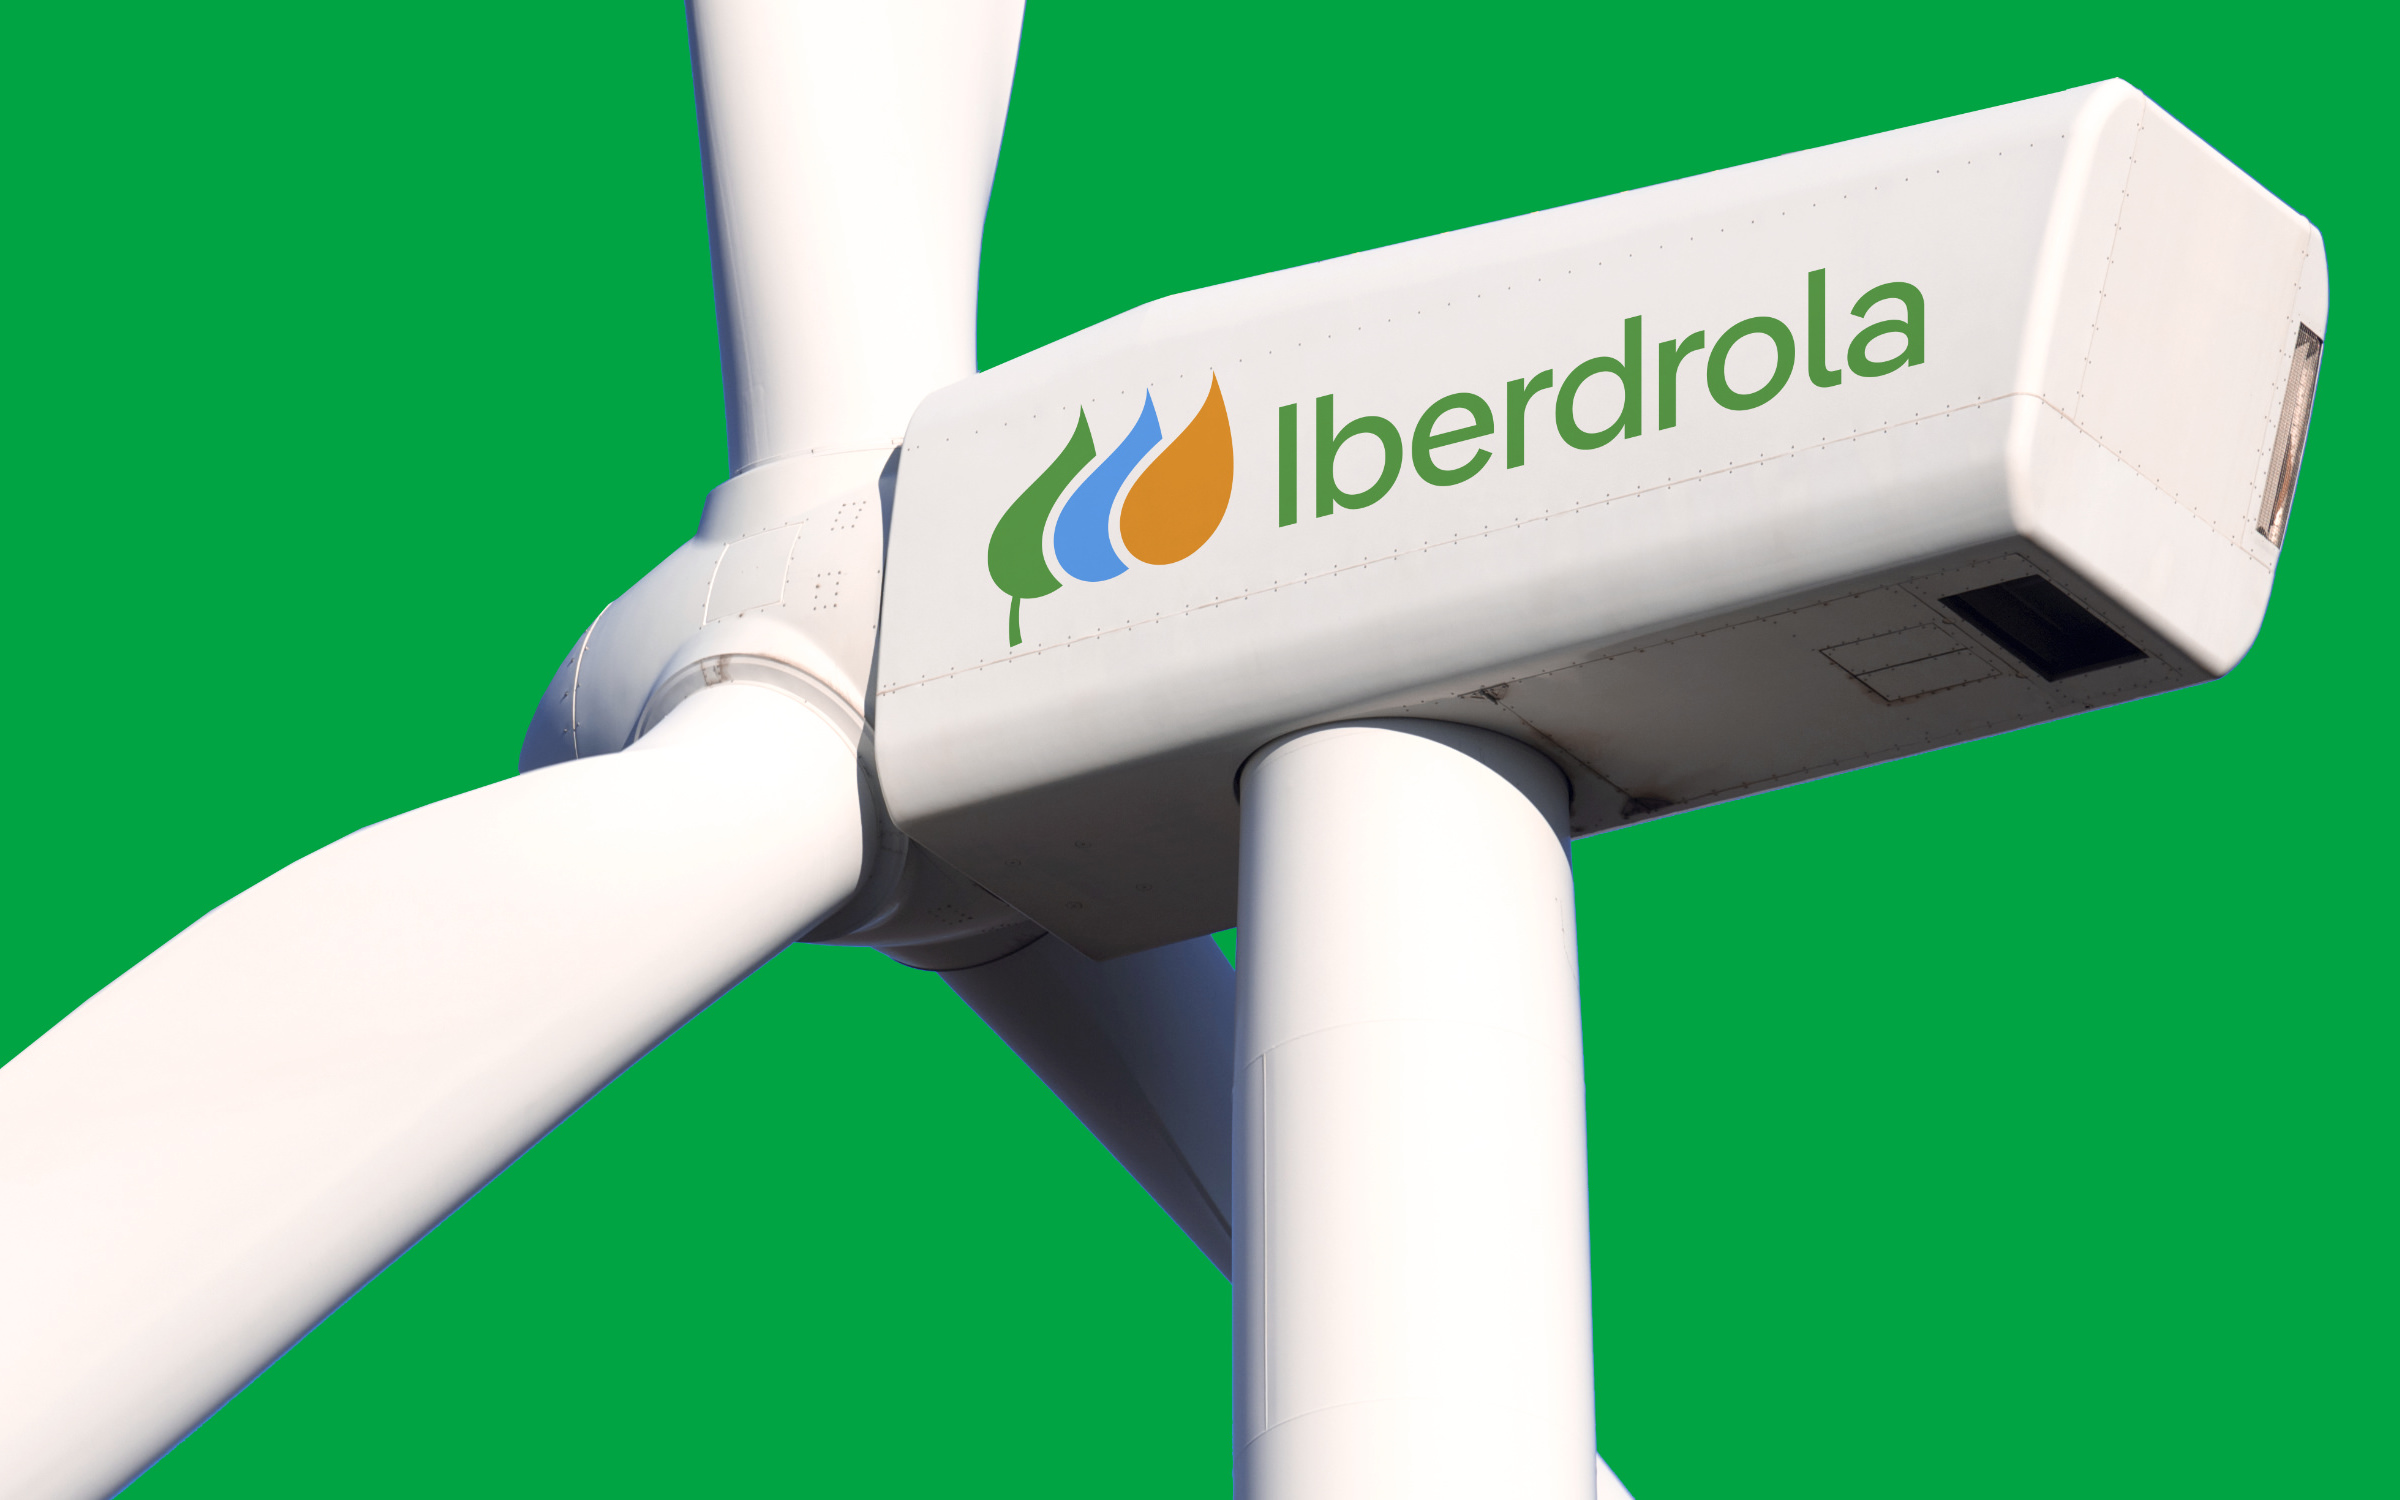 Iberdrola’s new corporate font family is a customized Pangea.